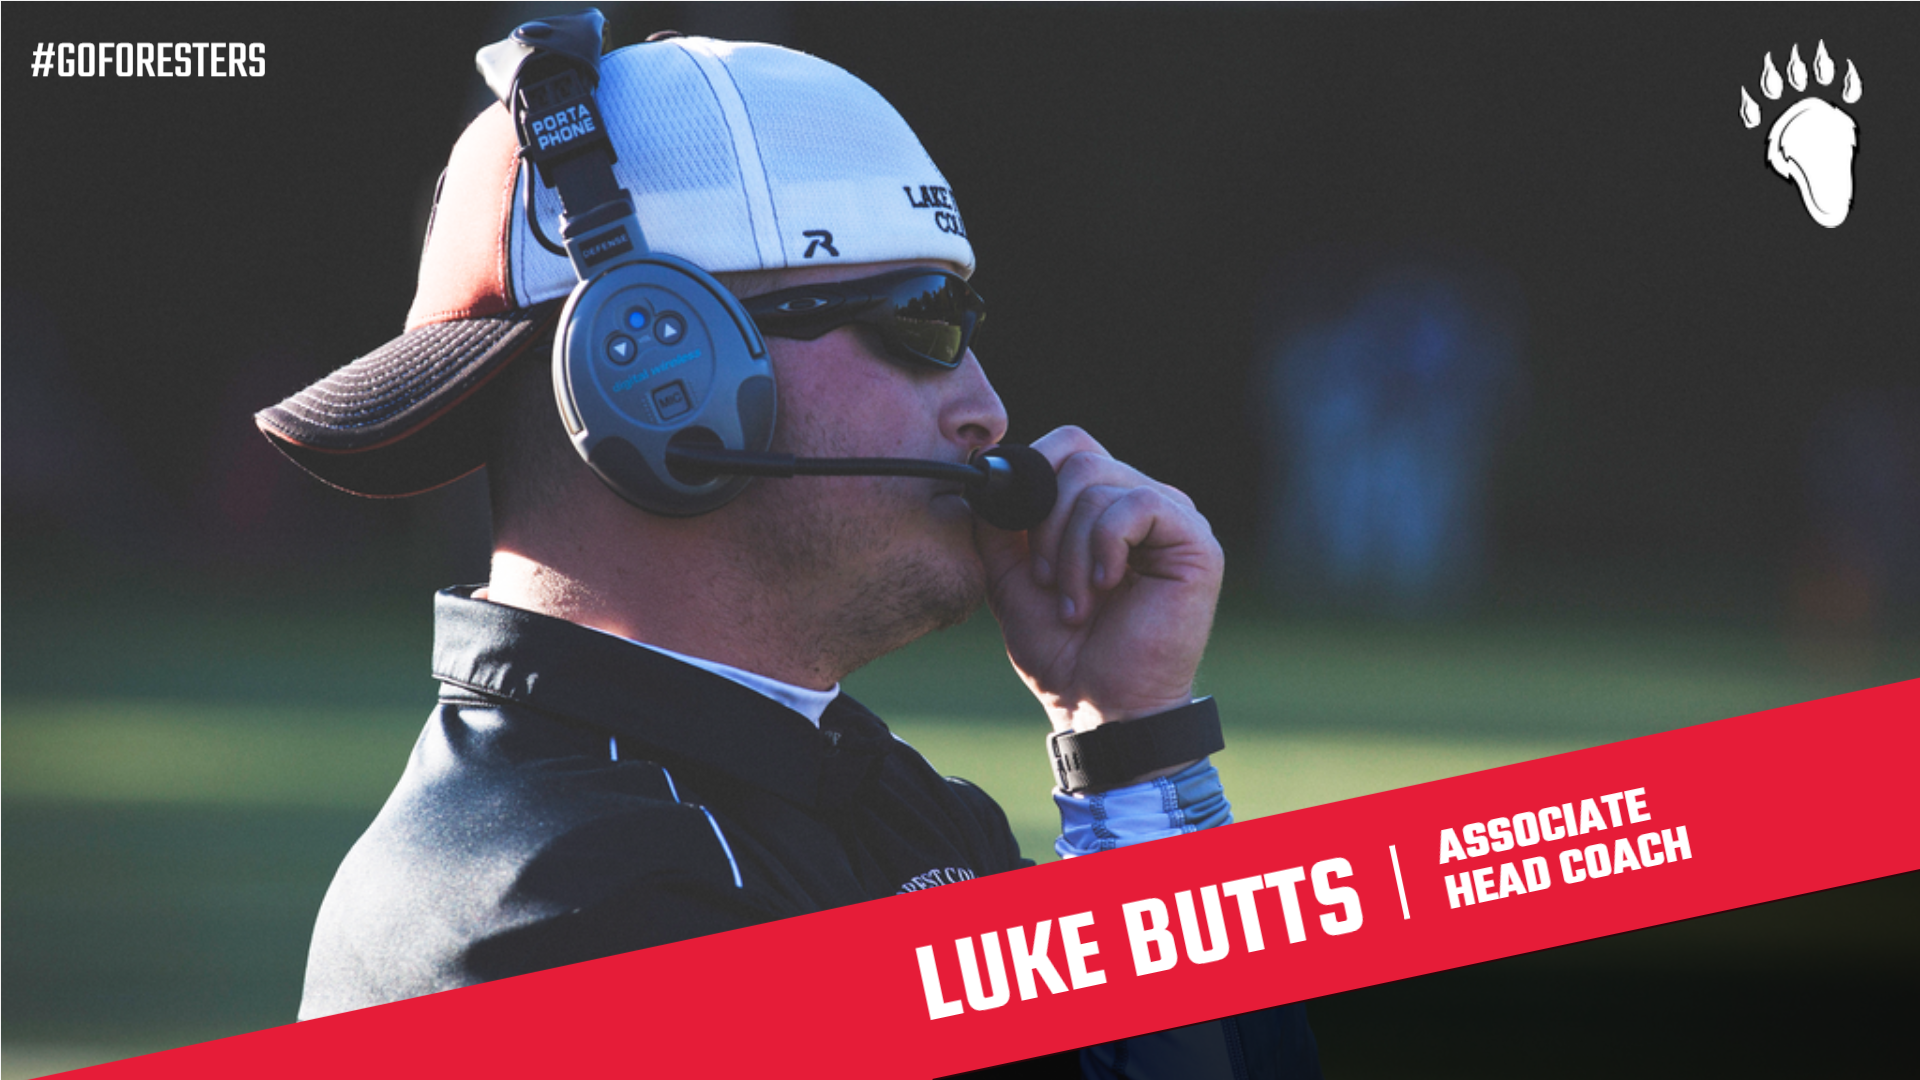 Luke Butts Promoted to Associate Head Coach